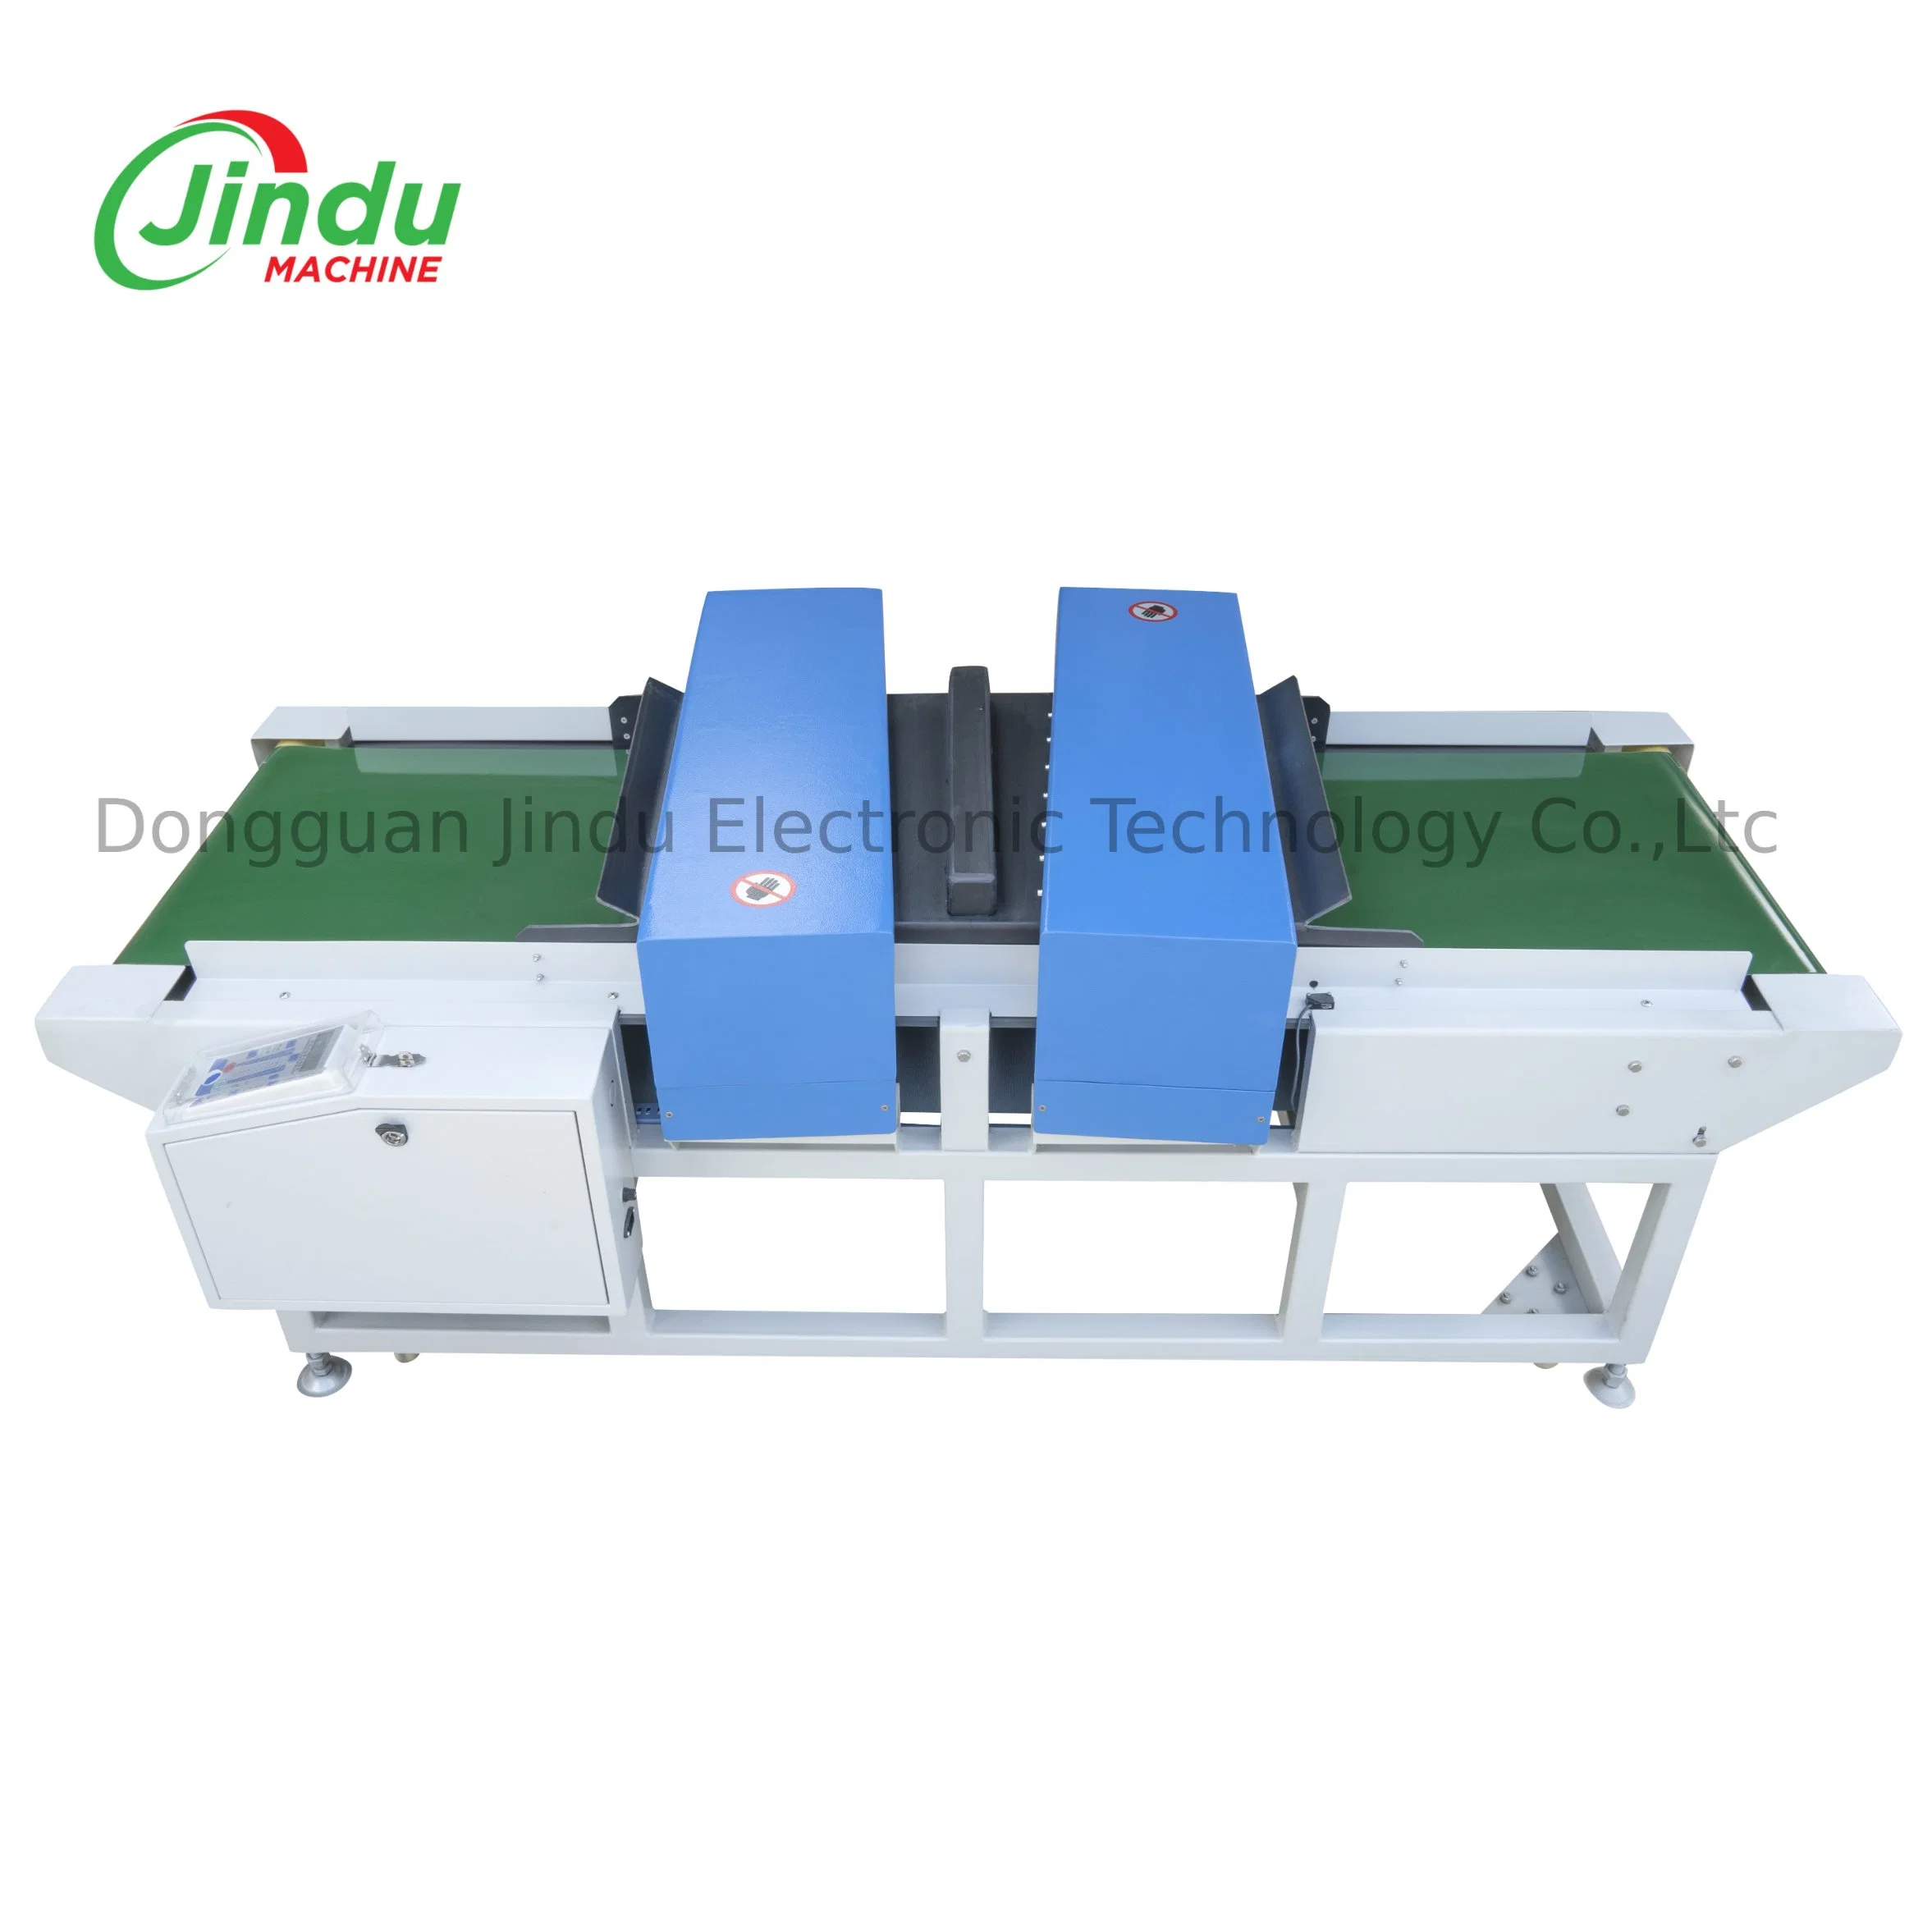 04 Jindu Machine for Conveyor Belt Type Metal Needle Detector Shirts Shoes in Garment and Shoe Apparel Textile